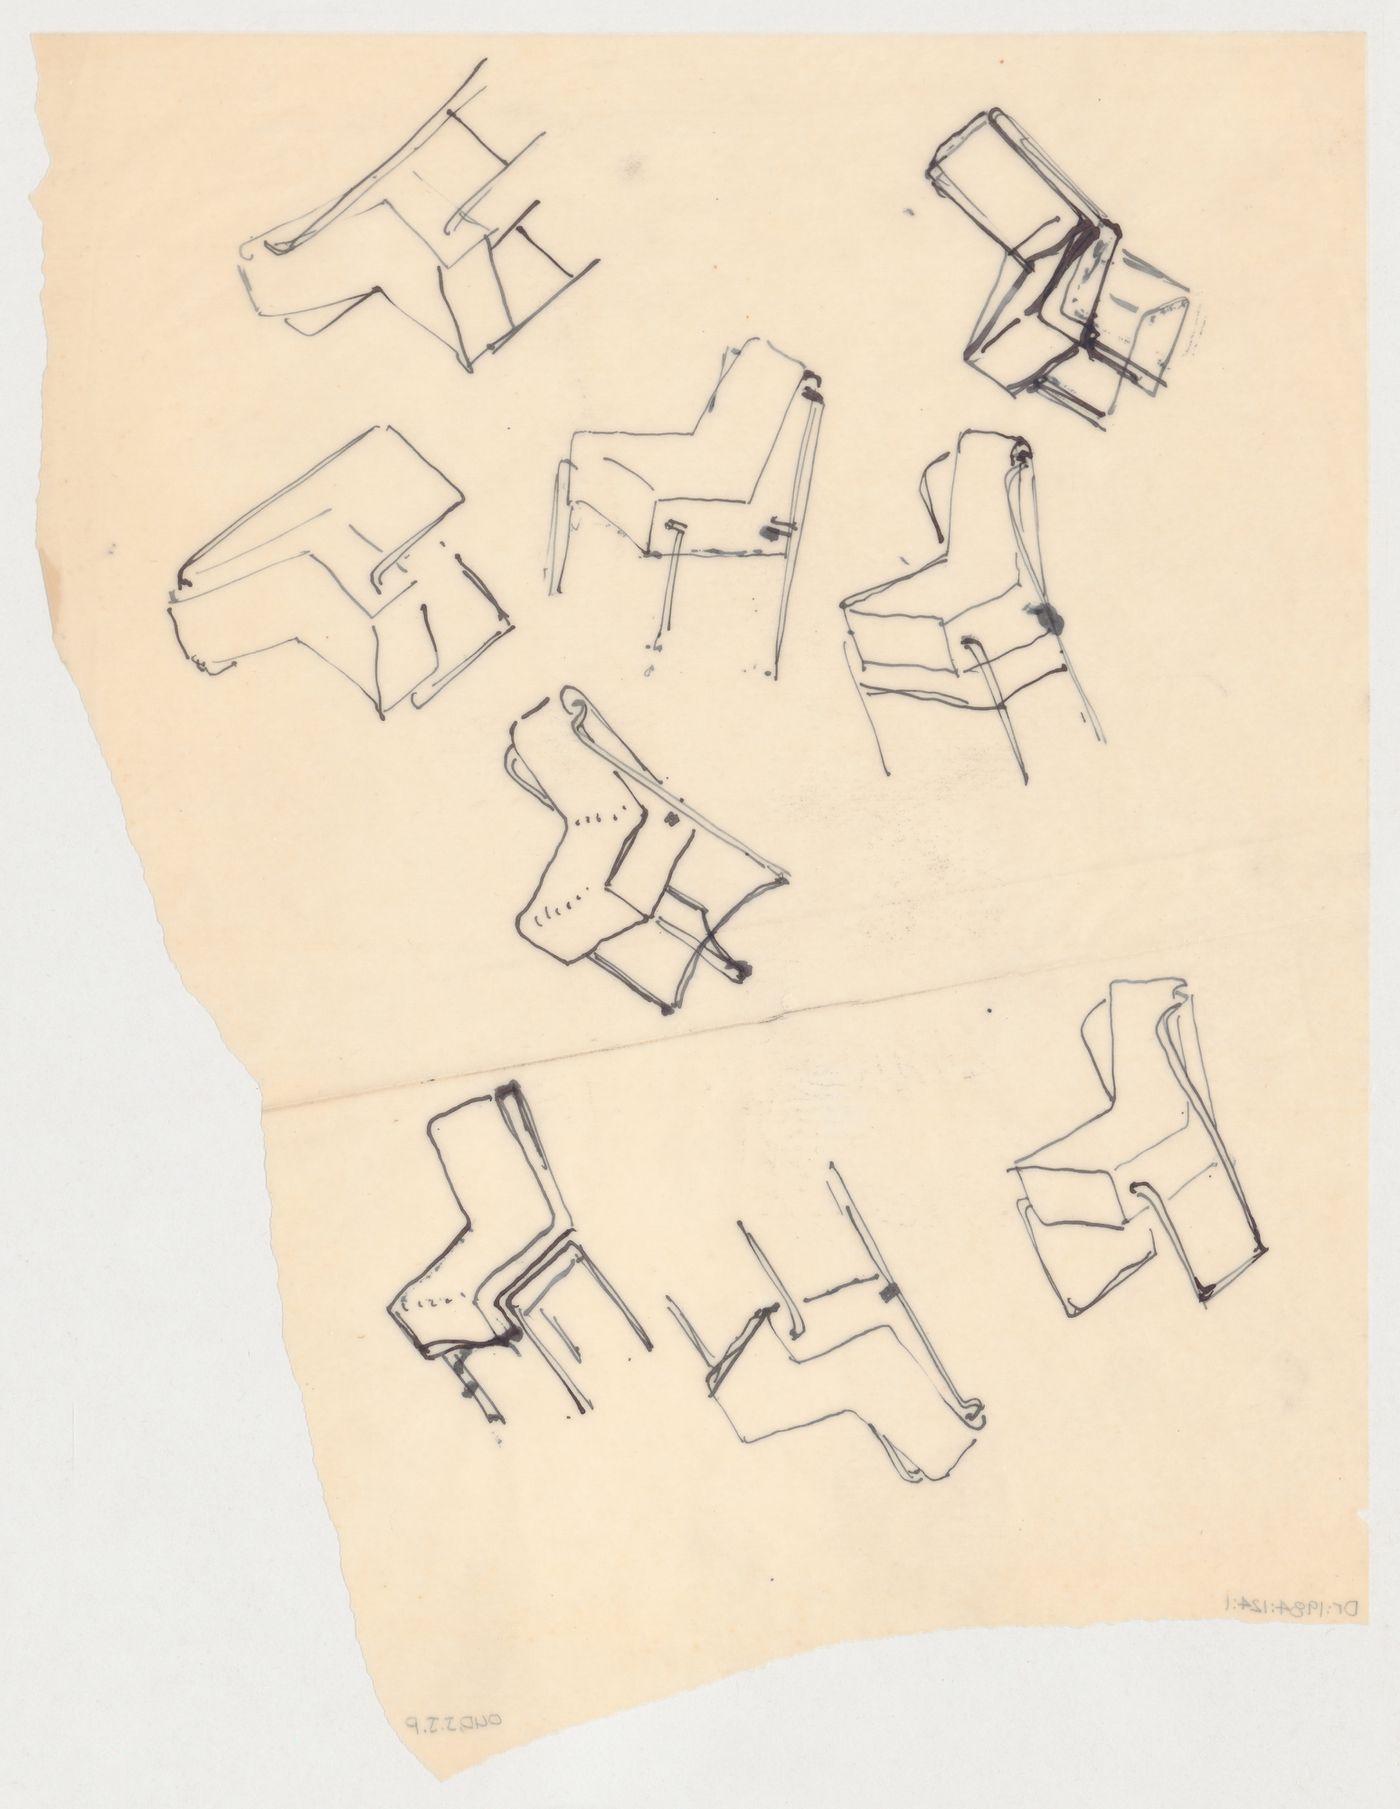 Sketch perspectives for chair designs for Metz & Co., Amsterdam, Netherlands